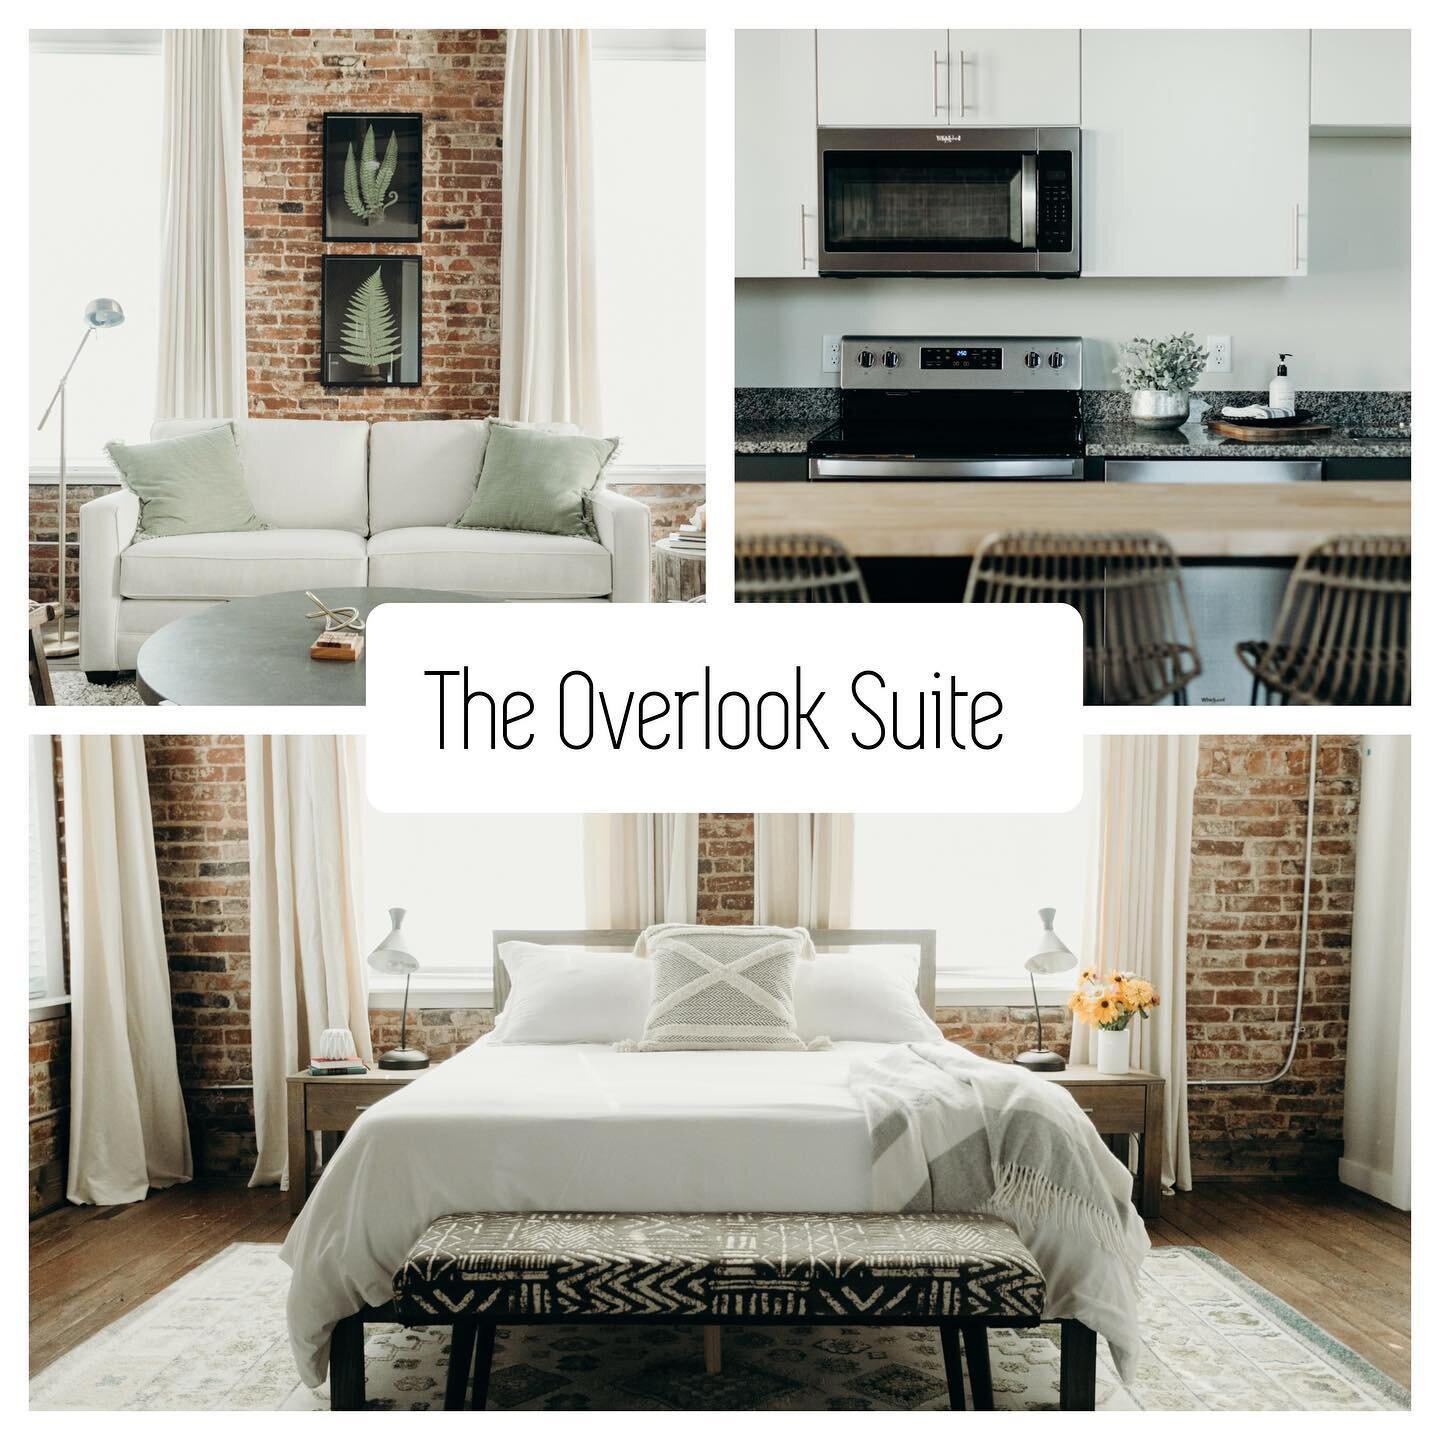 A last minute cancellation means a beautiful loft getaway for you!! The Overlook is available this weekend, hurry and book now and enjoy the amazing weather at one of the four local state parks, breakfast at @thecoffeecollective_tn , shopping @synerg